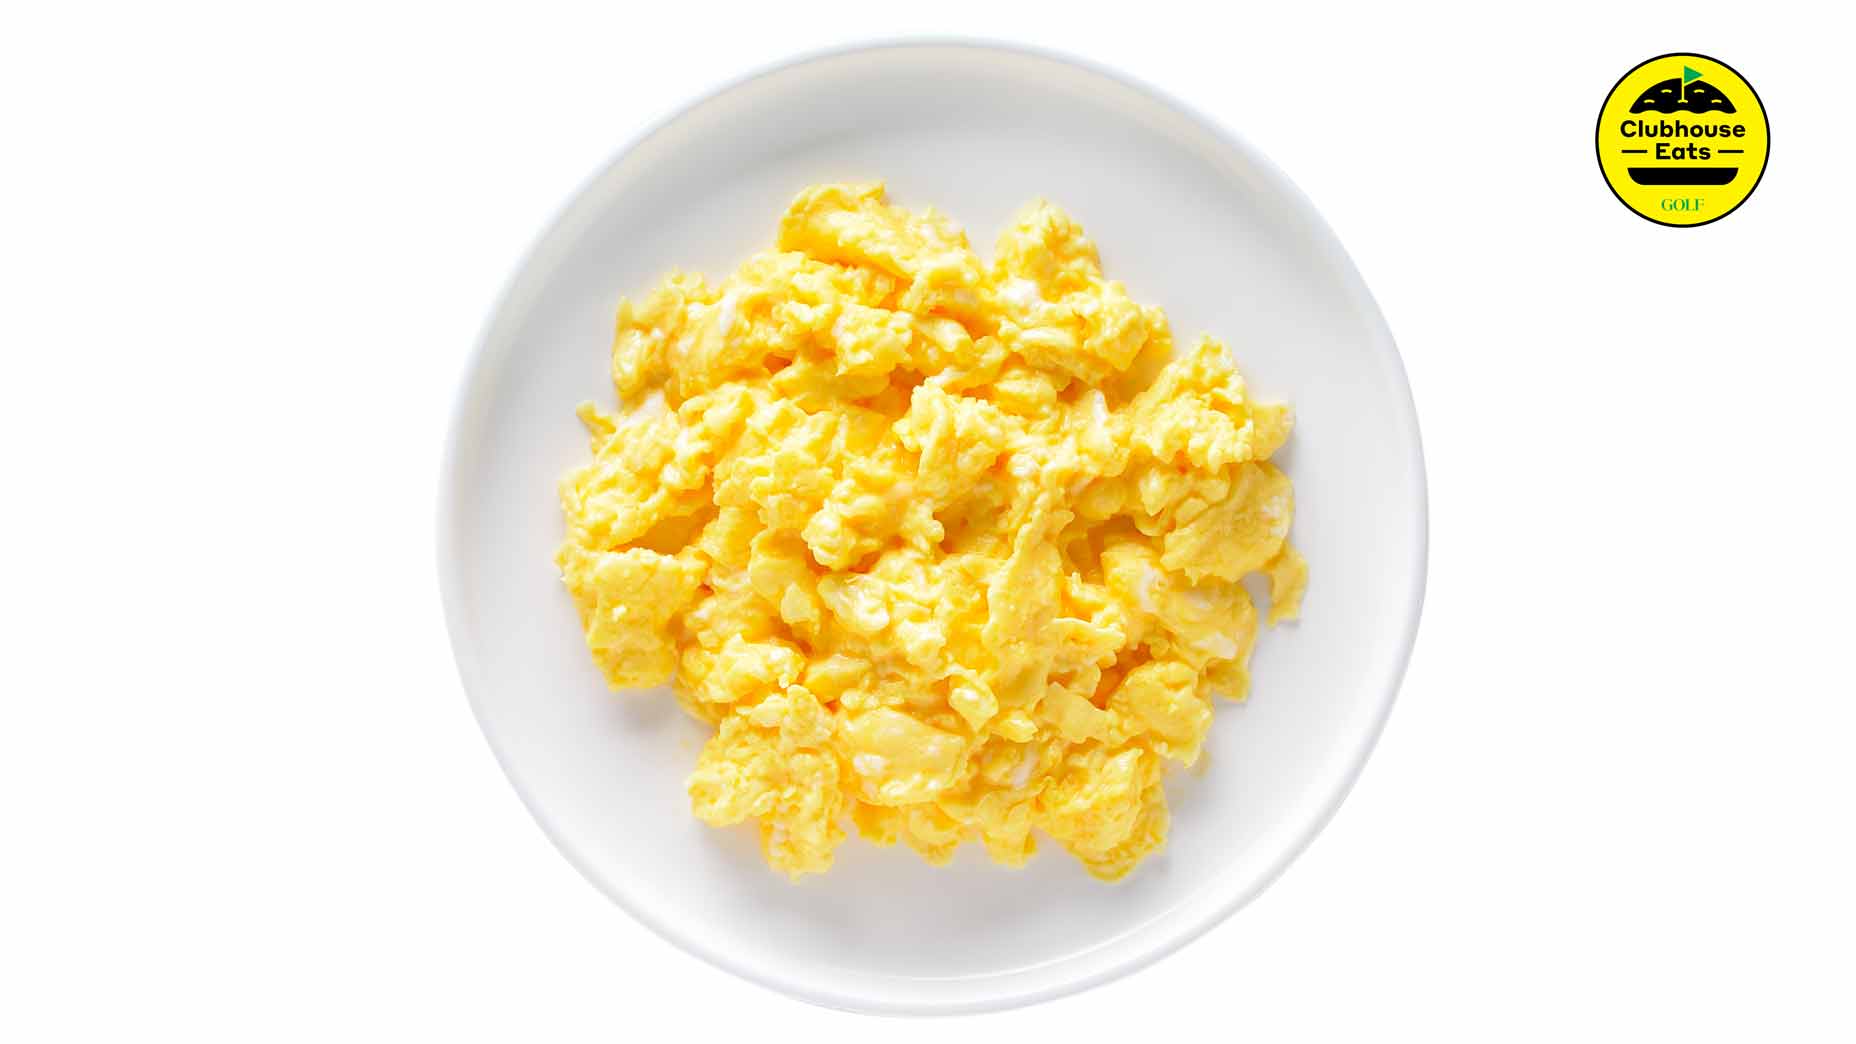 Common scrambled egg mistakes and how to correct them